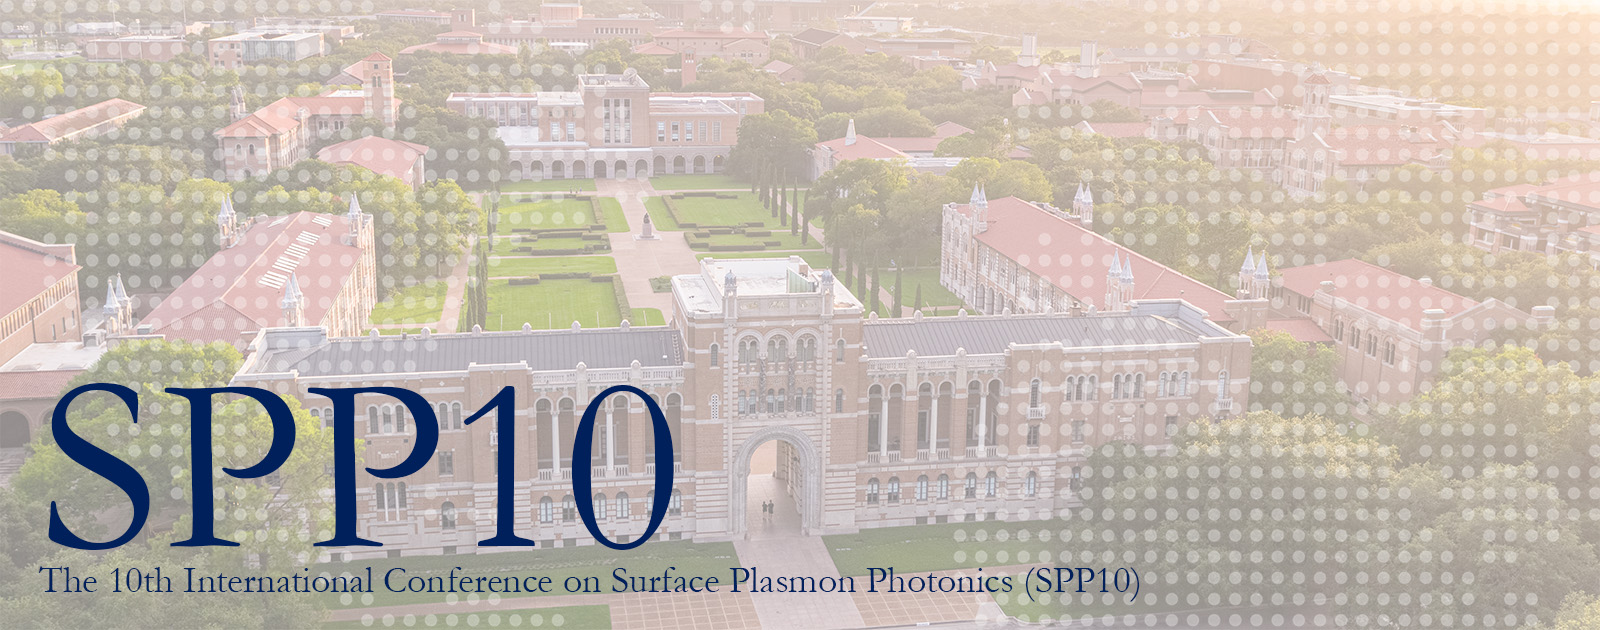 Header image for the SSP10 conference showing the Rice University campus